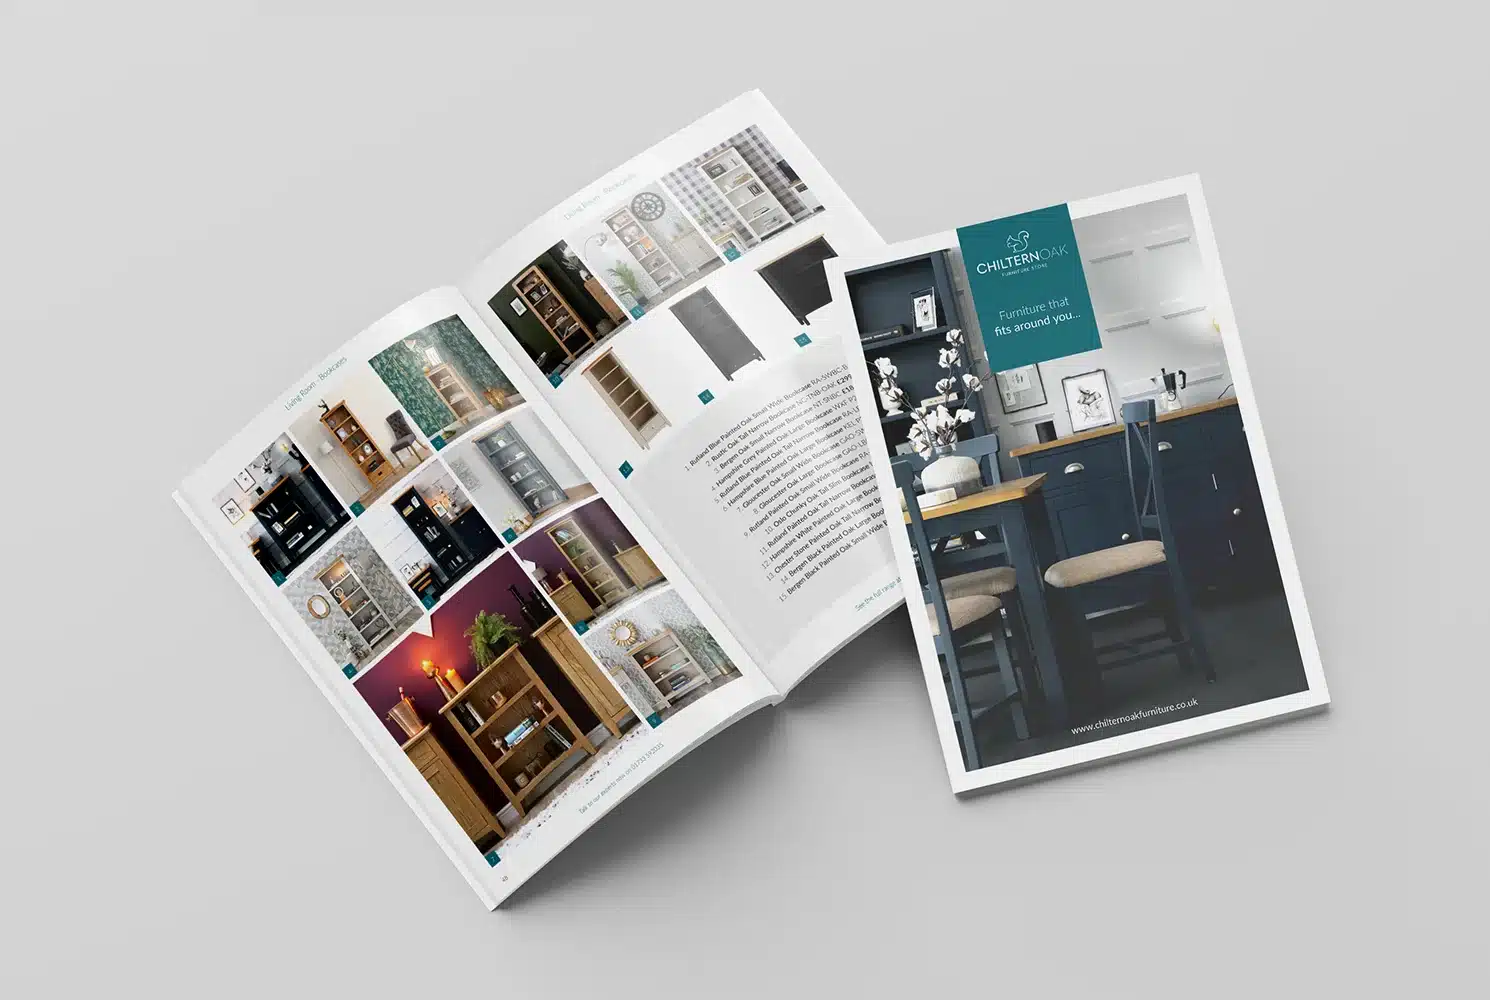 Mock up of the Chiltern Oak furniture catalogue showing a product double page spread and the front cover